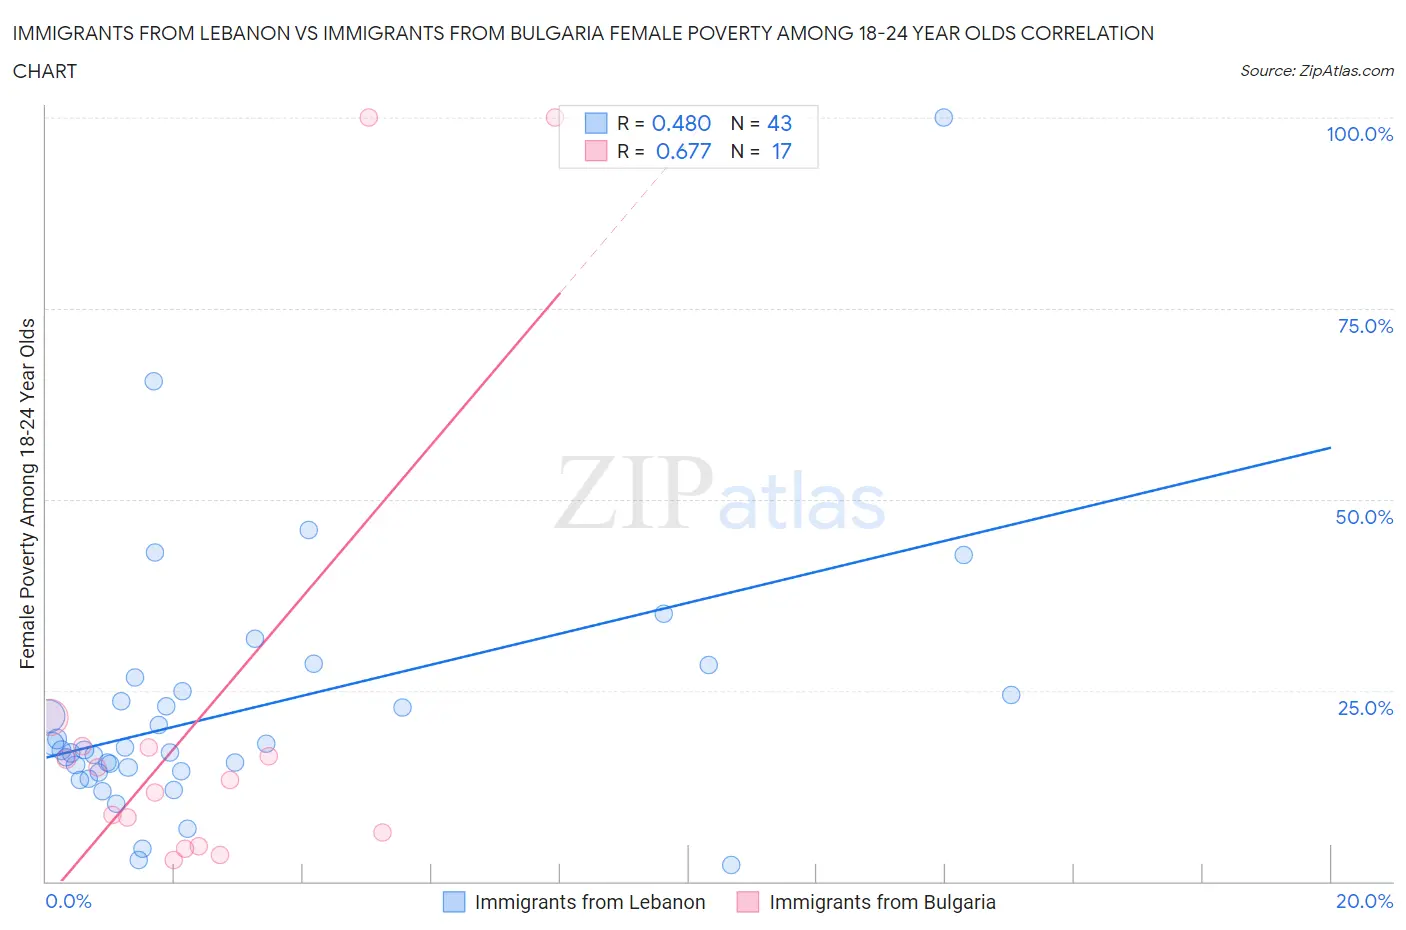 Immigrants from Lebanon vs Immigrants from Bulgaria Female Poverty Among 18-24 Year Olds